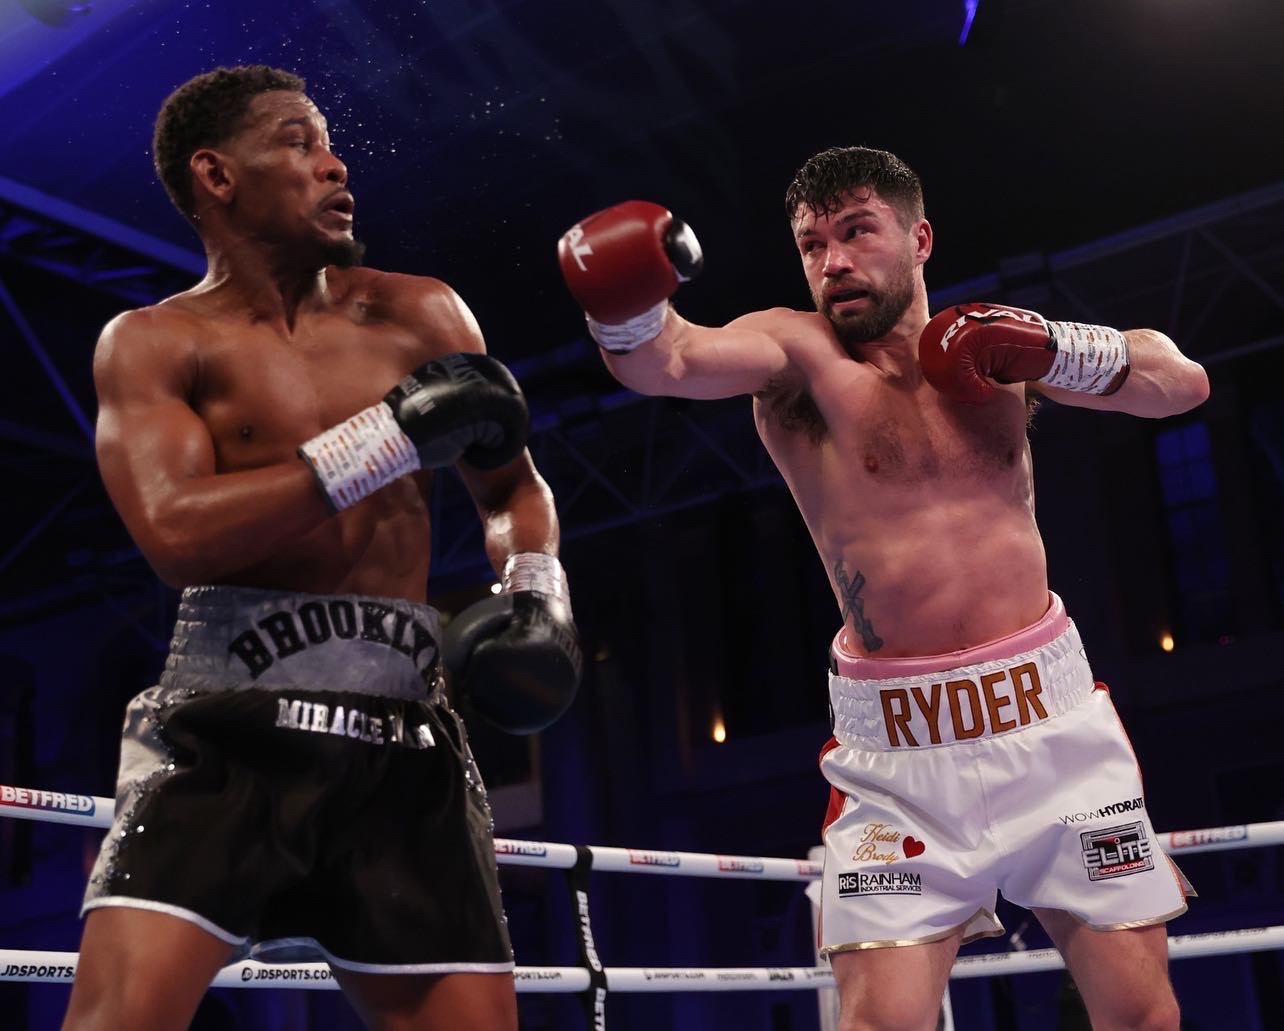 Ryder defeated Jacobs in WBA eliminator